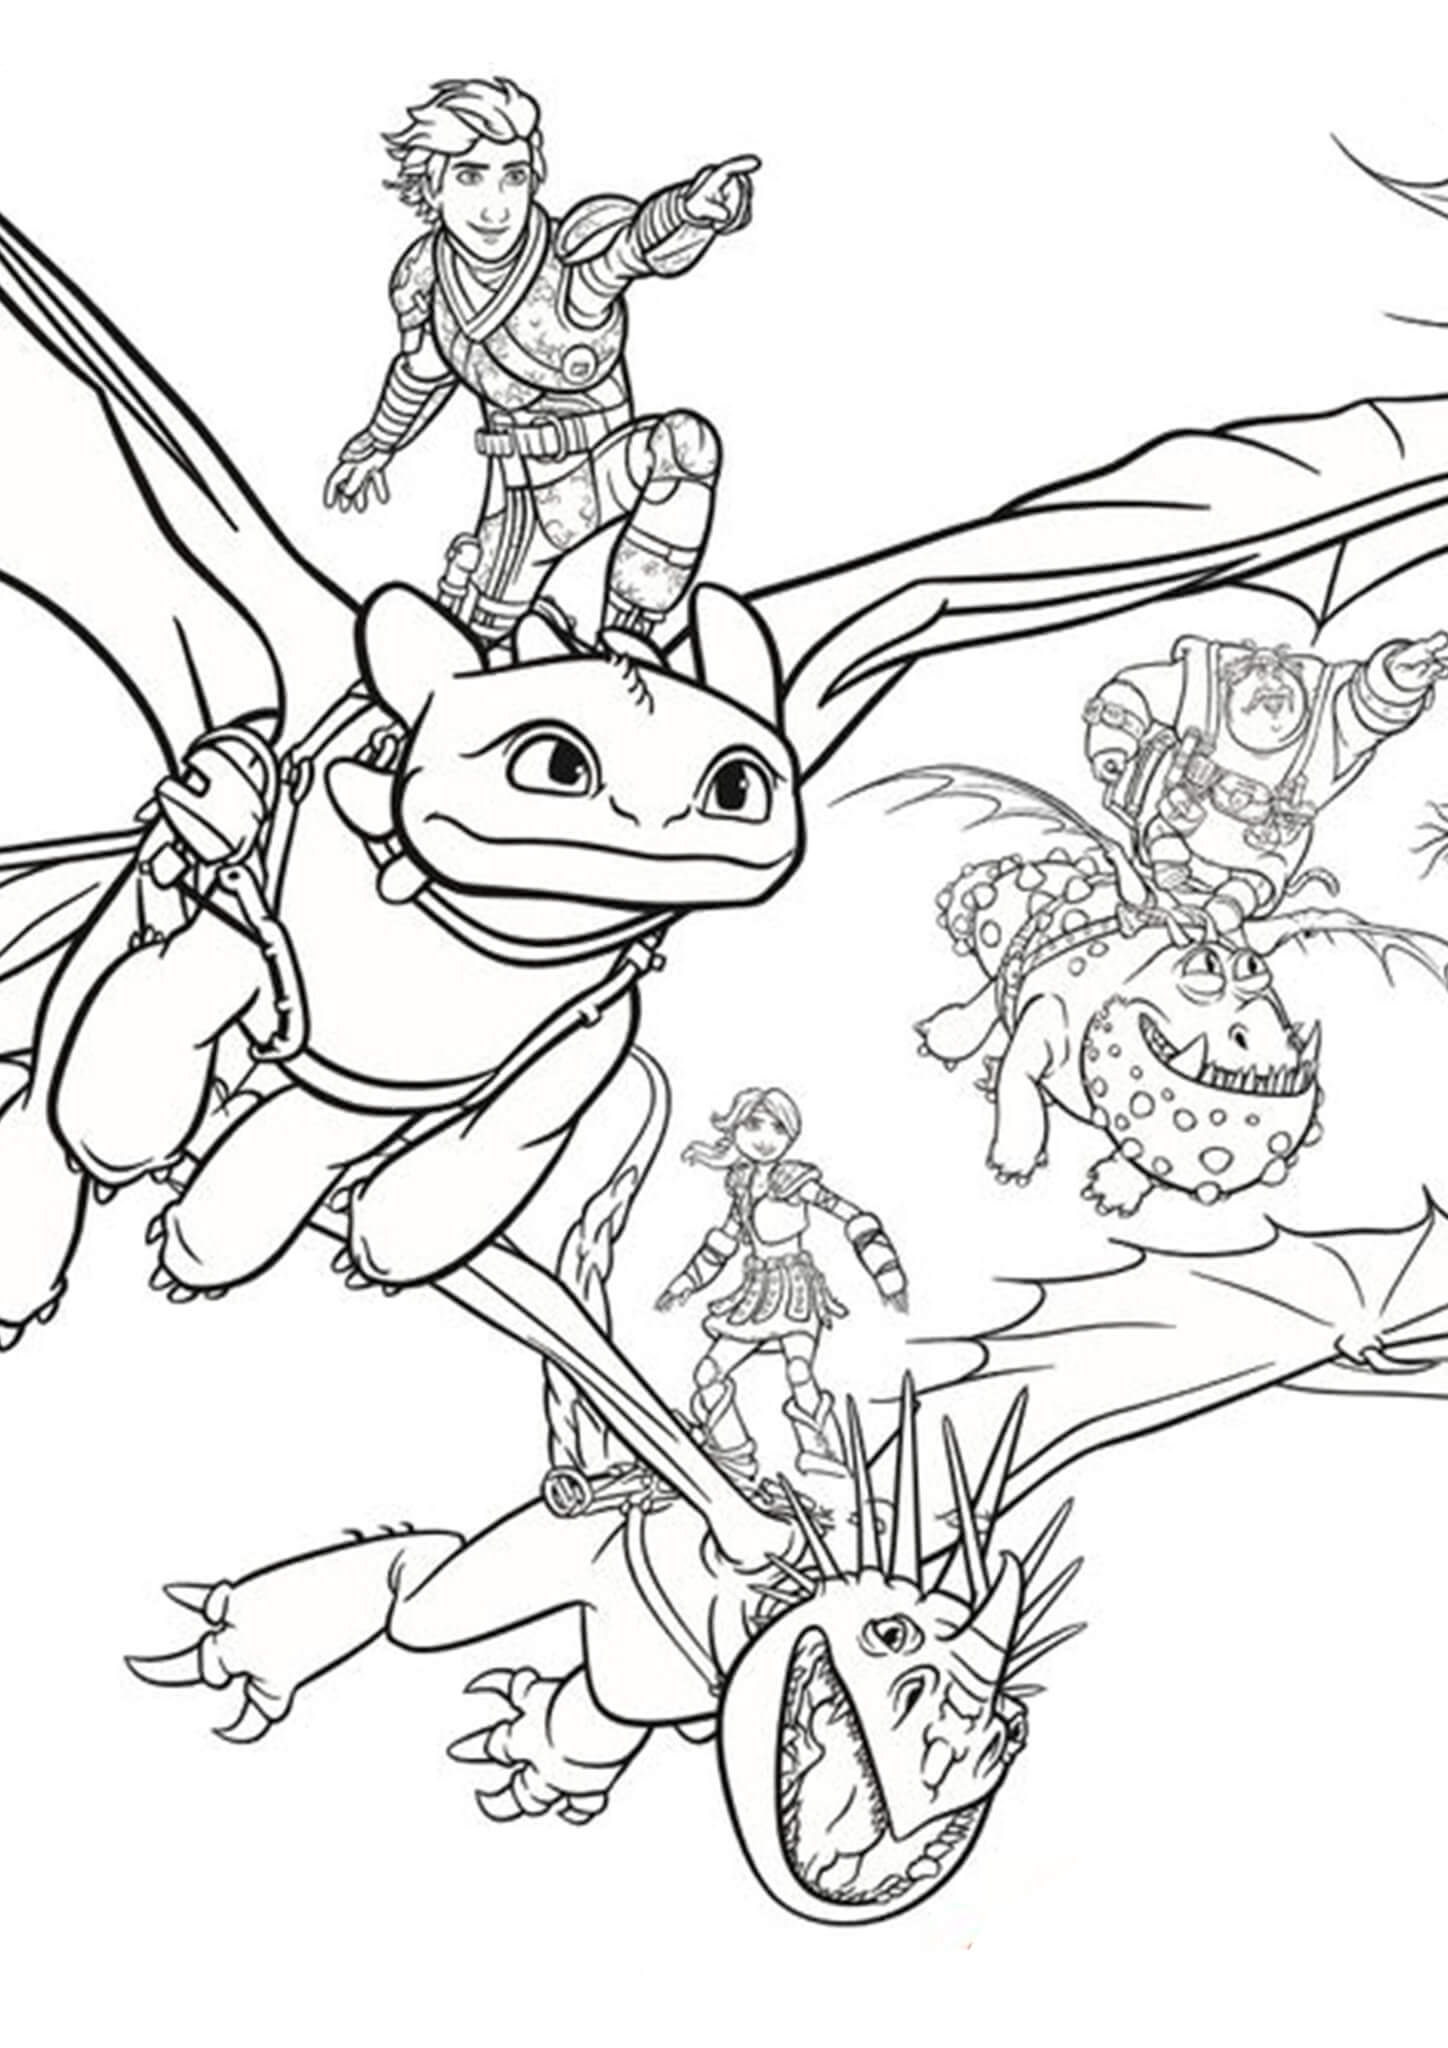 How To Train Your Dragon Colouring Pages Printable